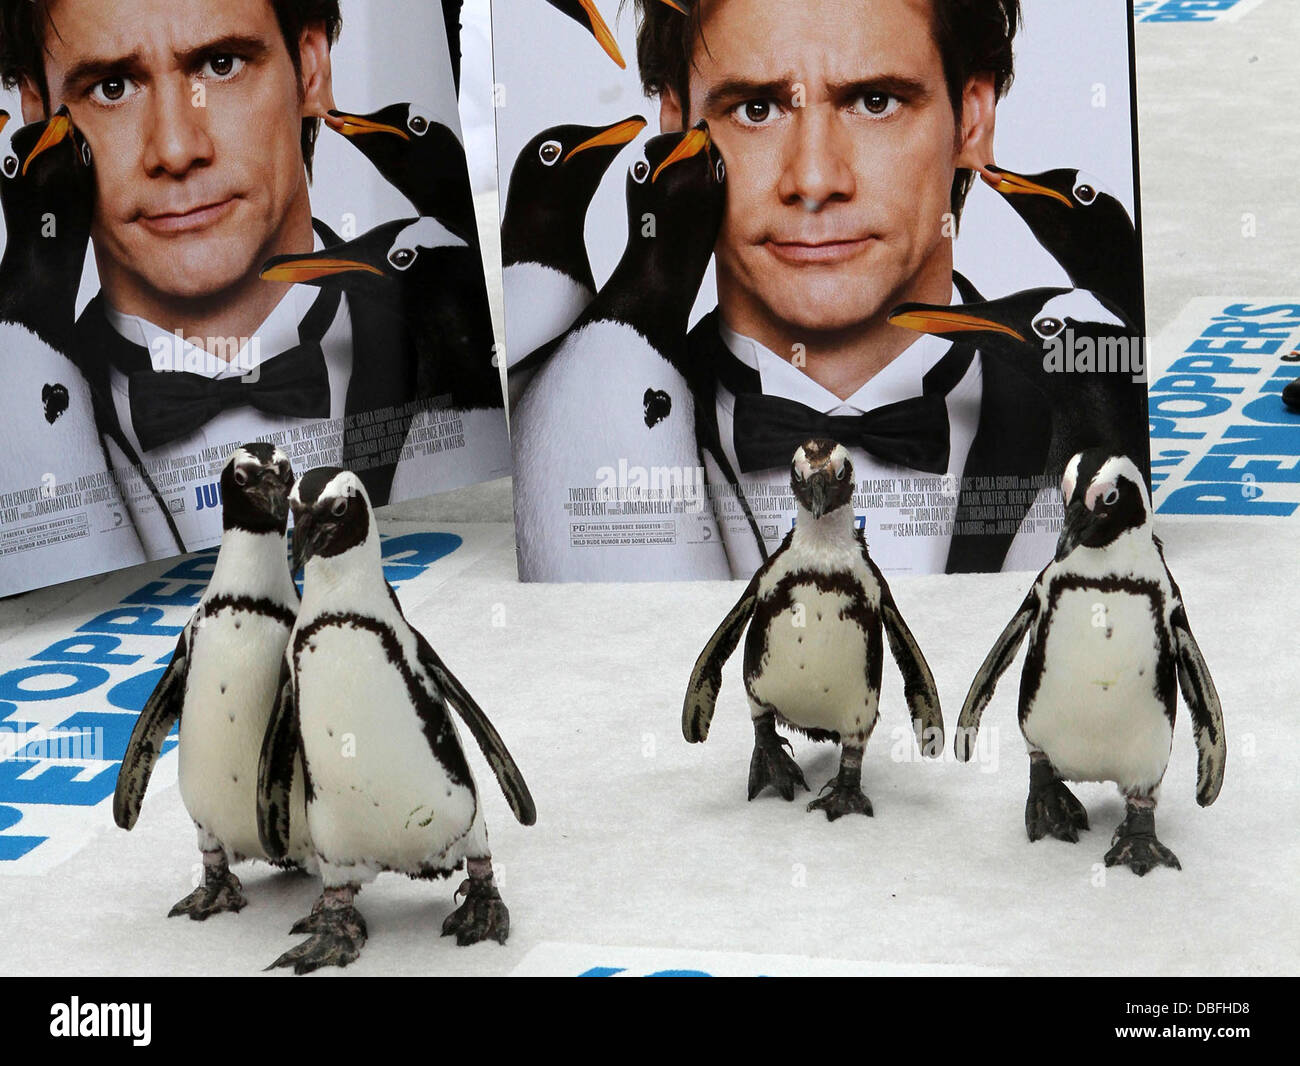 Penguins Premiere 'Mr. Popper's Penguins' shown at the Chinese Grauman's theatre Hollywood, California - 12.06.11 Stock Photo